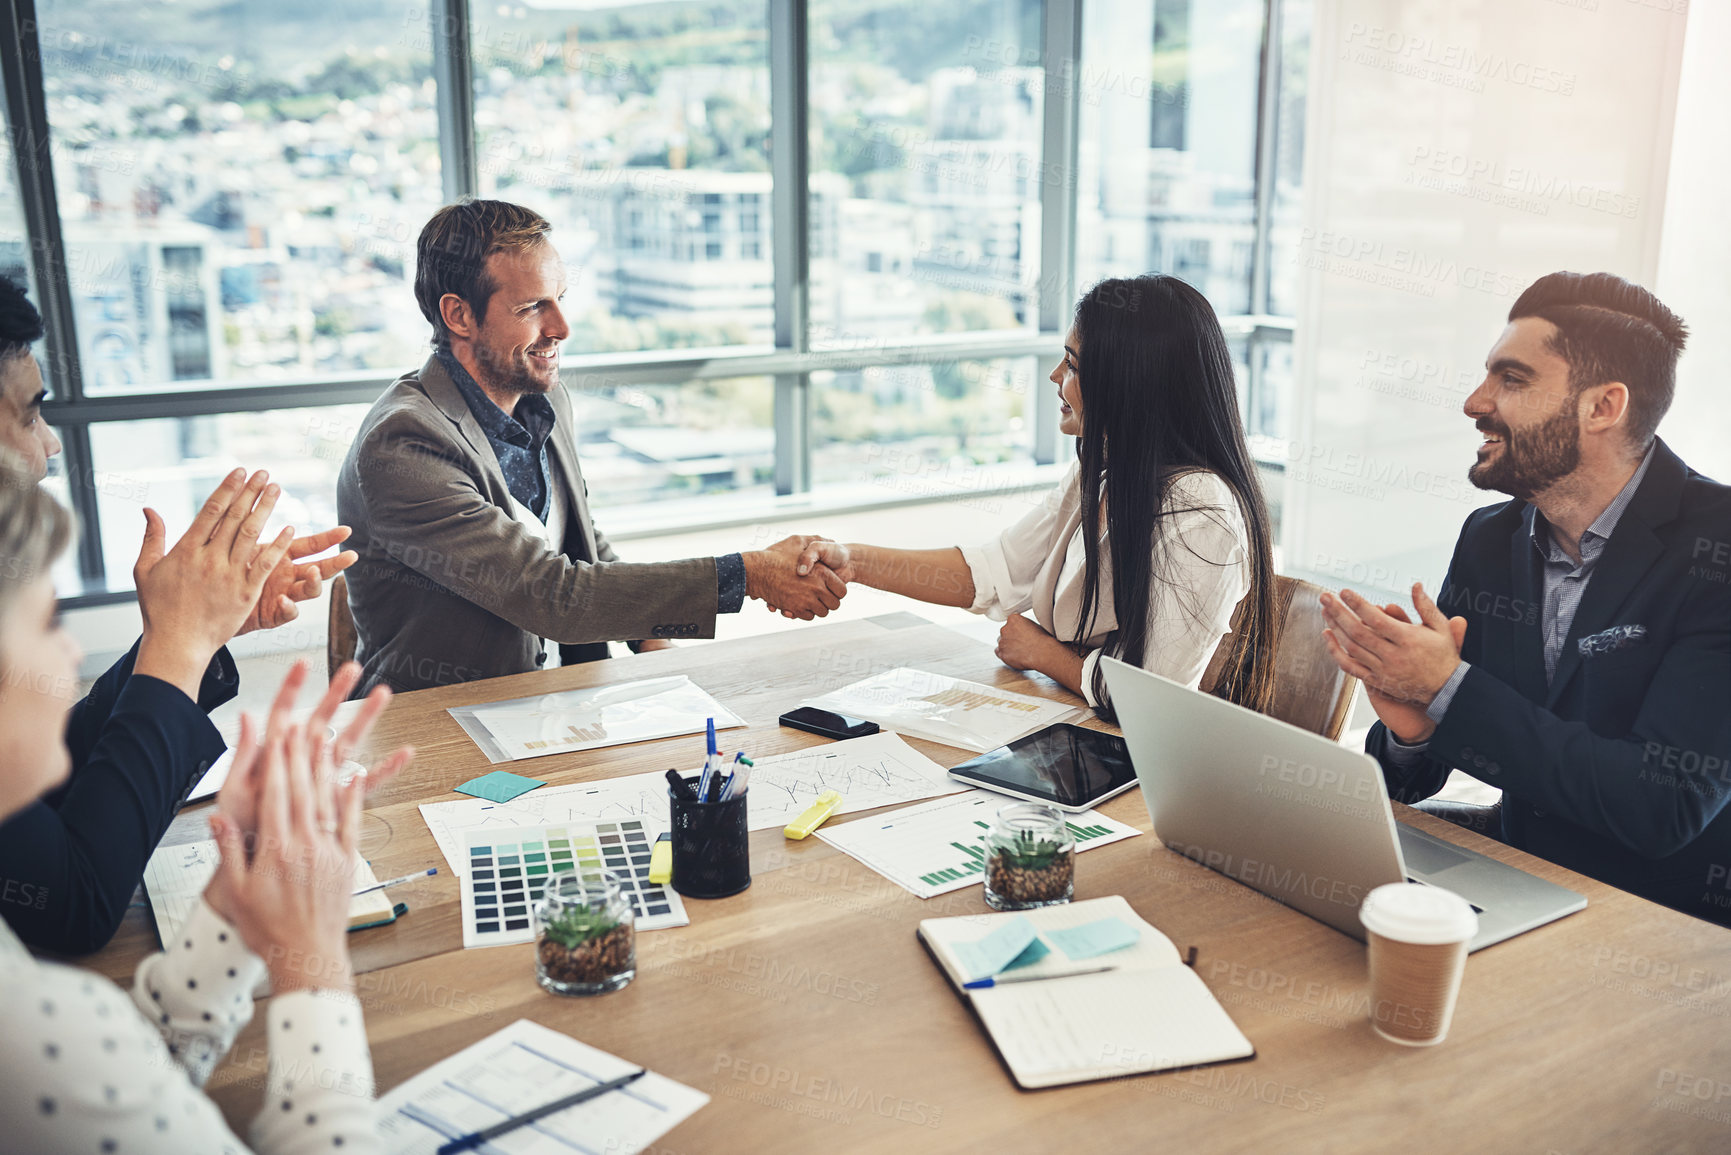 Buy stock photo Shot of two businesspeople shaking hands while their colleagues applaud in an office